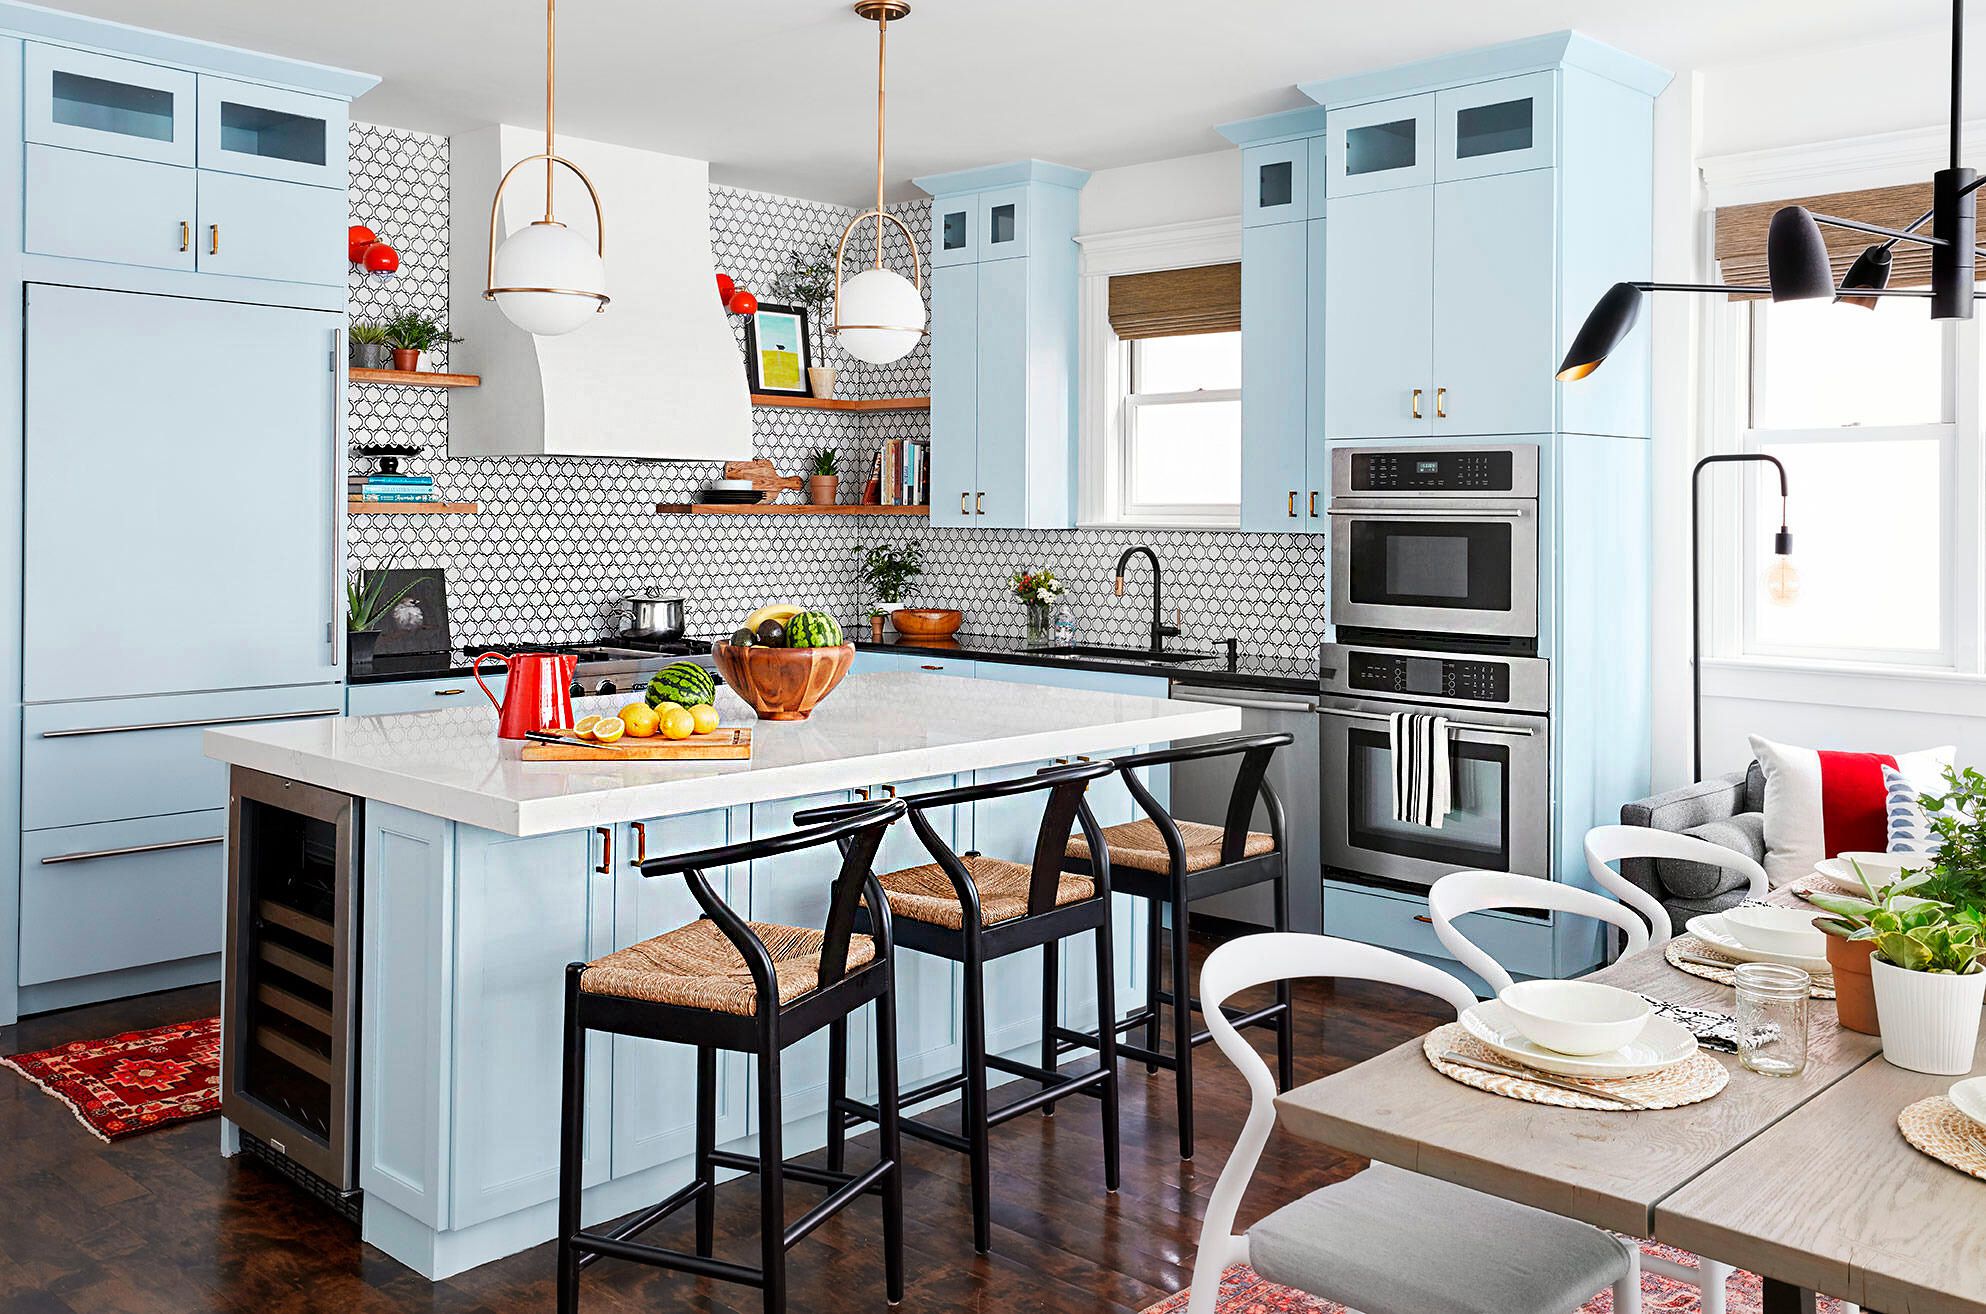 Are You Ready for a Total Change for Your Small Kitchen?